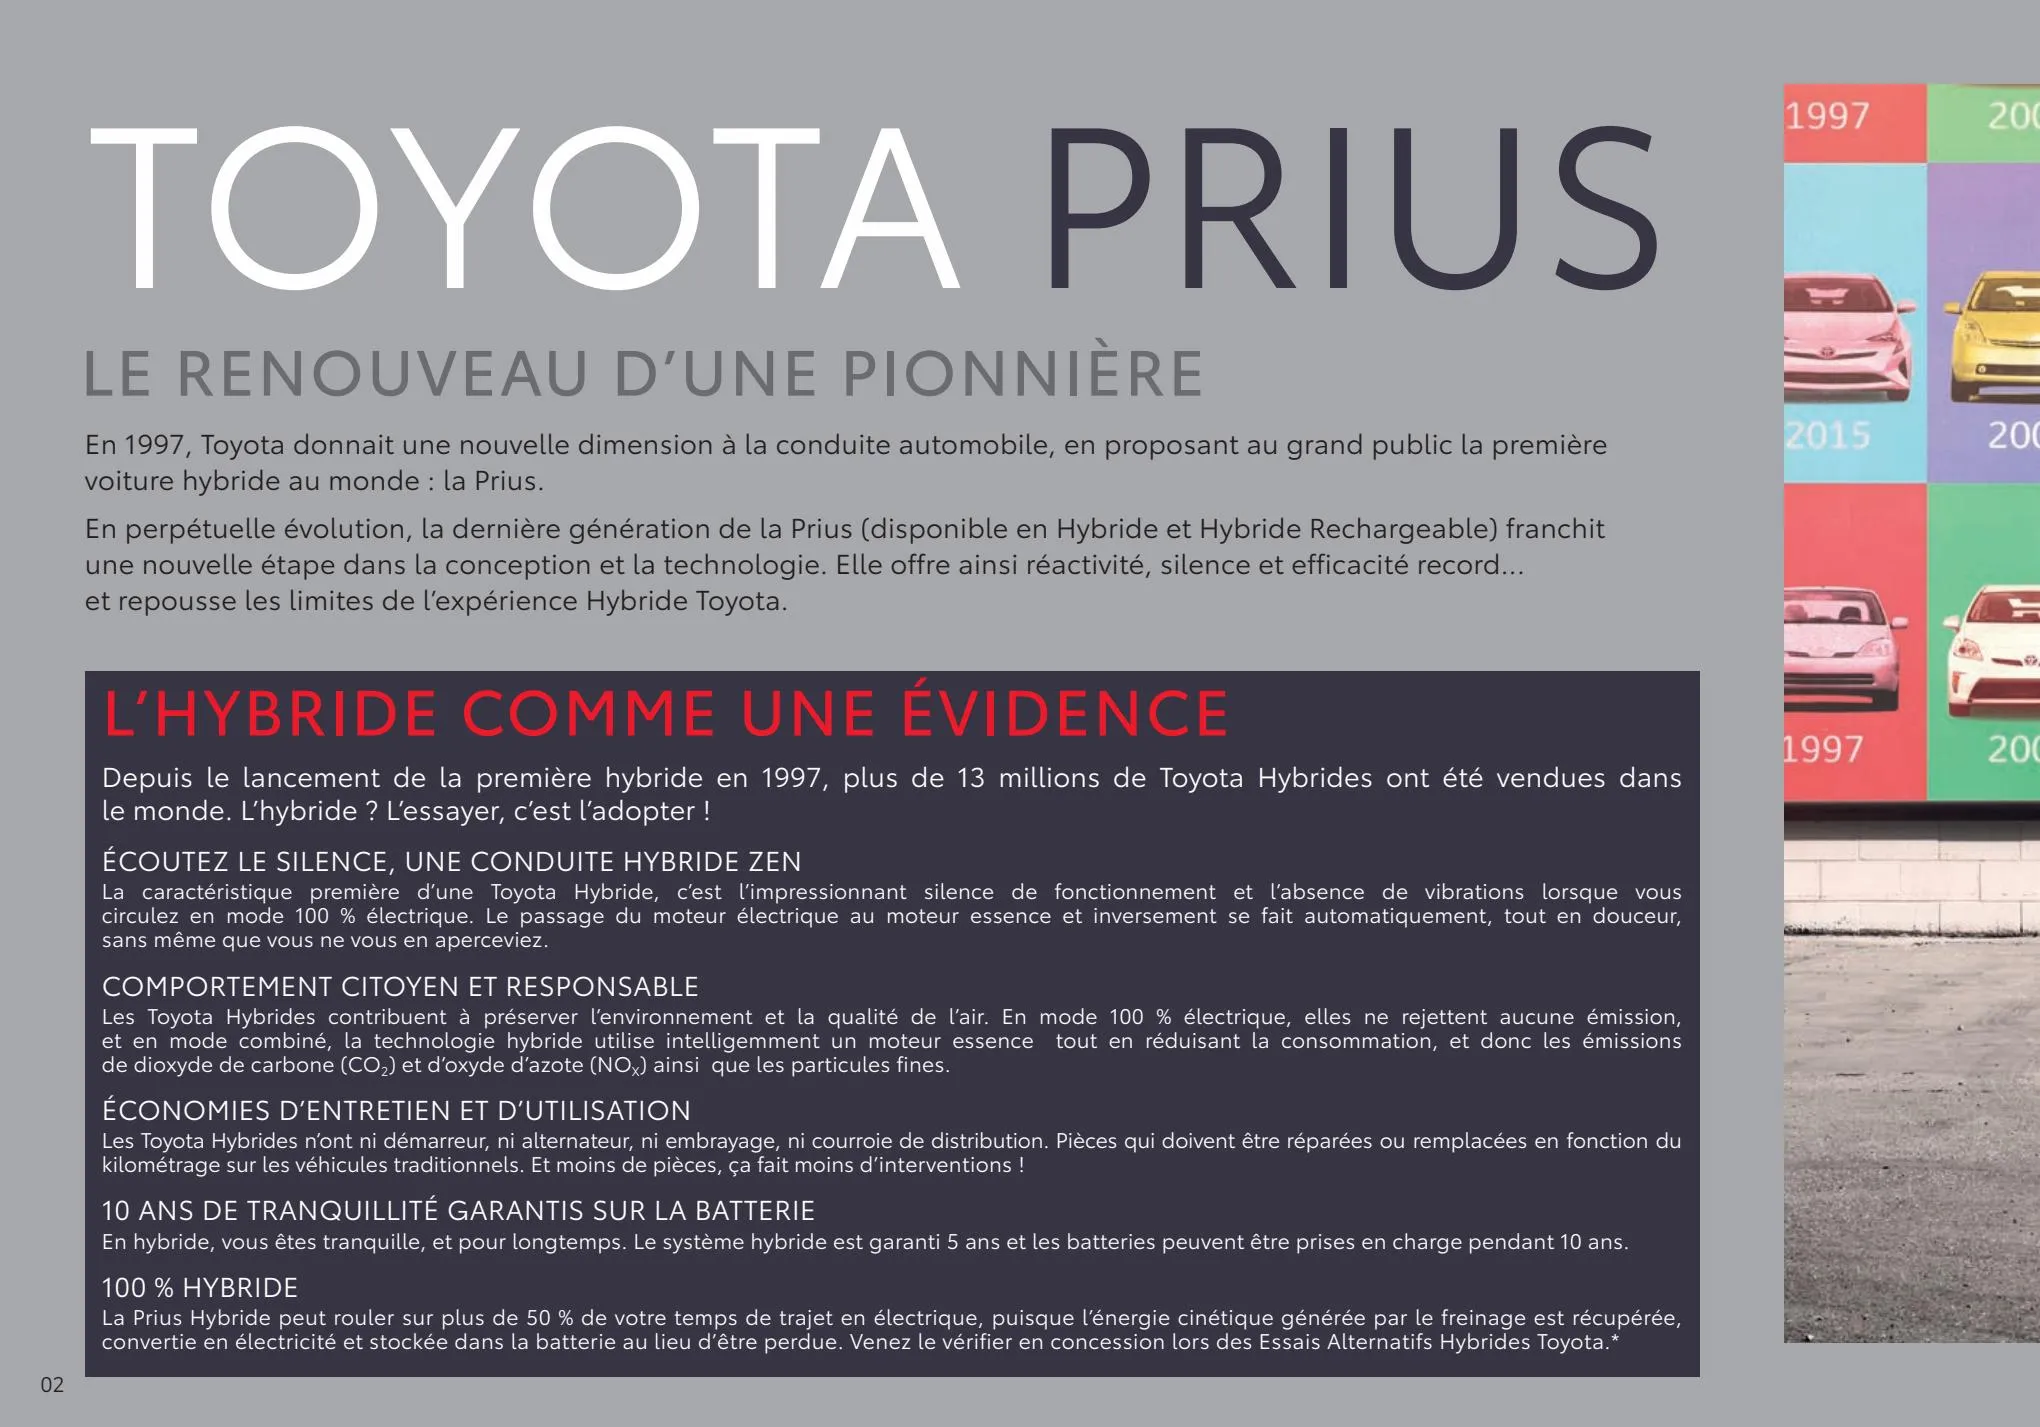 Catalogue Prius Hybride Rechargeable, page 00002